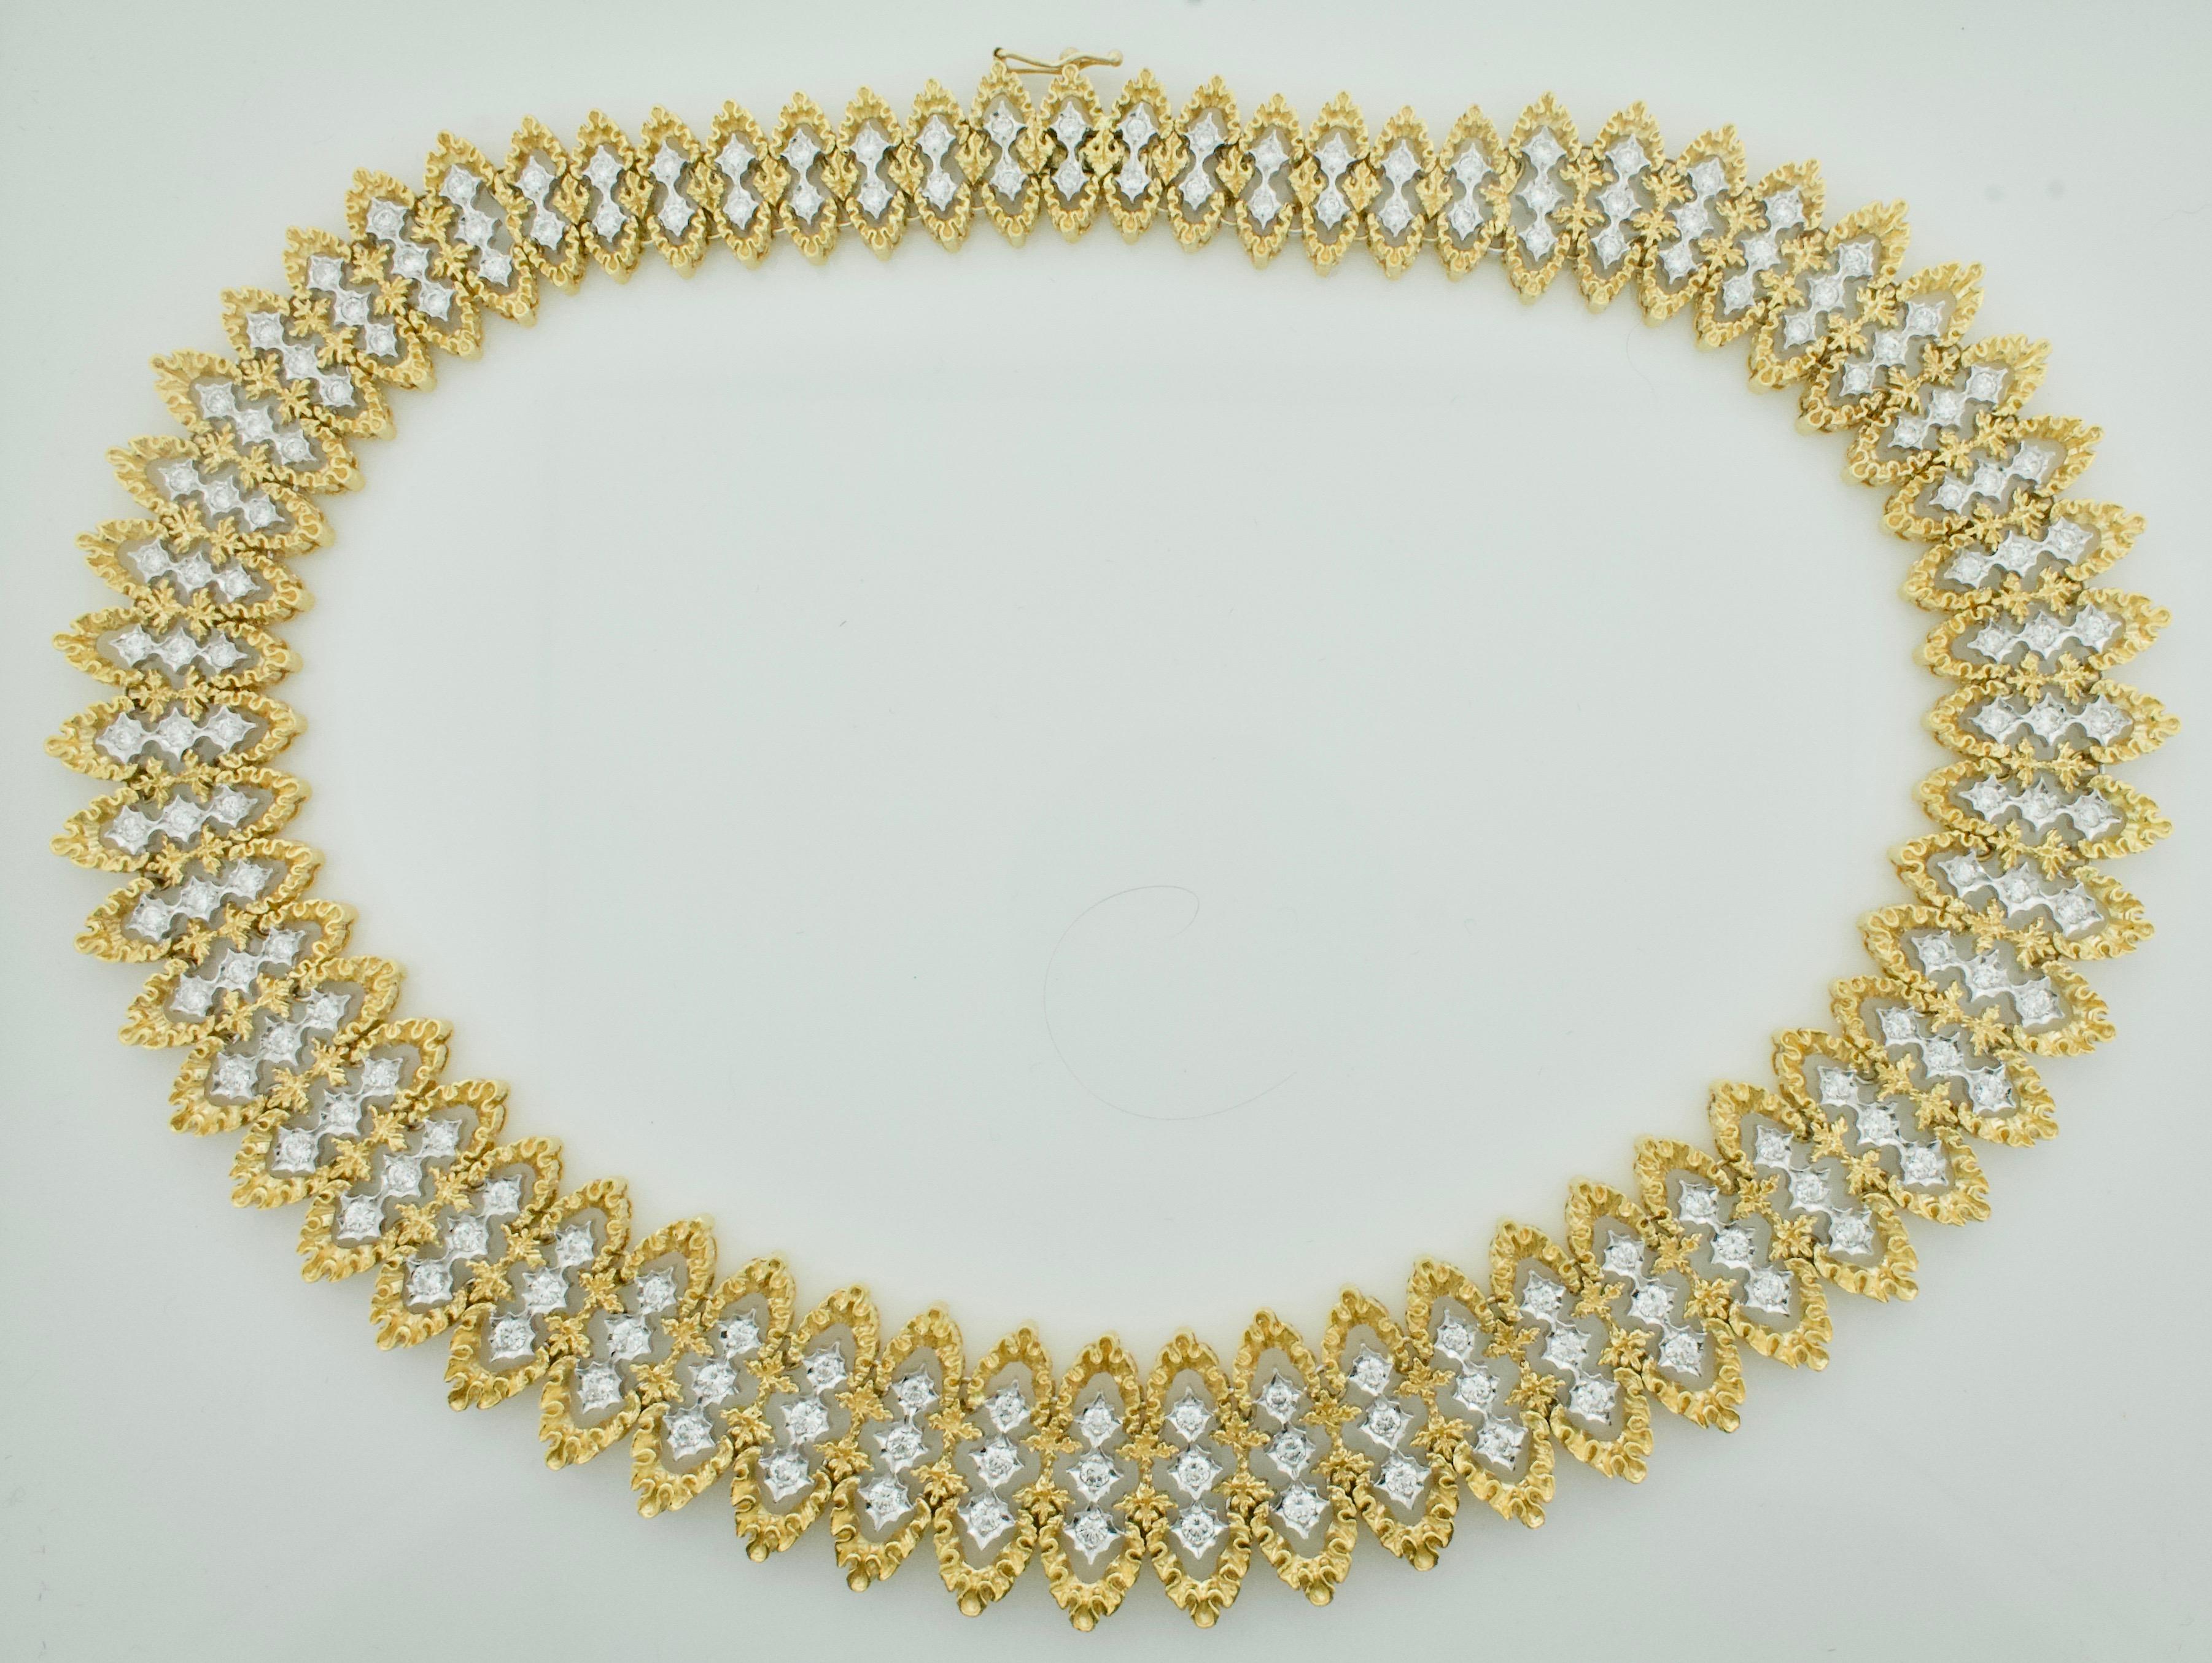 Impressive Heavy Diamond  Necklace in 18k Yellow Gold [5 Ounces+] 7.00 carats  For Sale 3